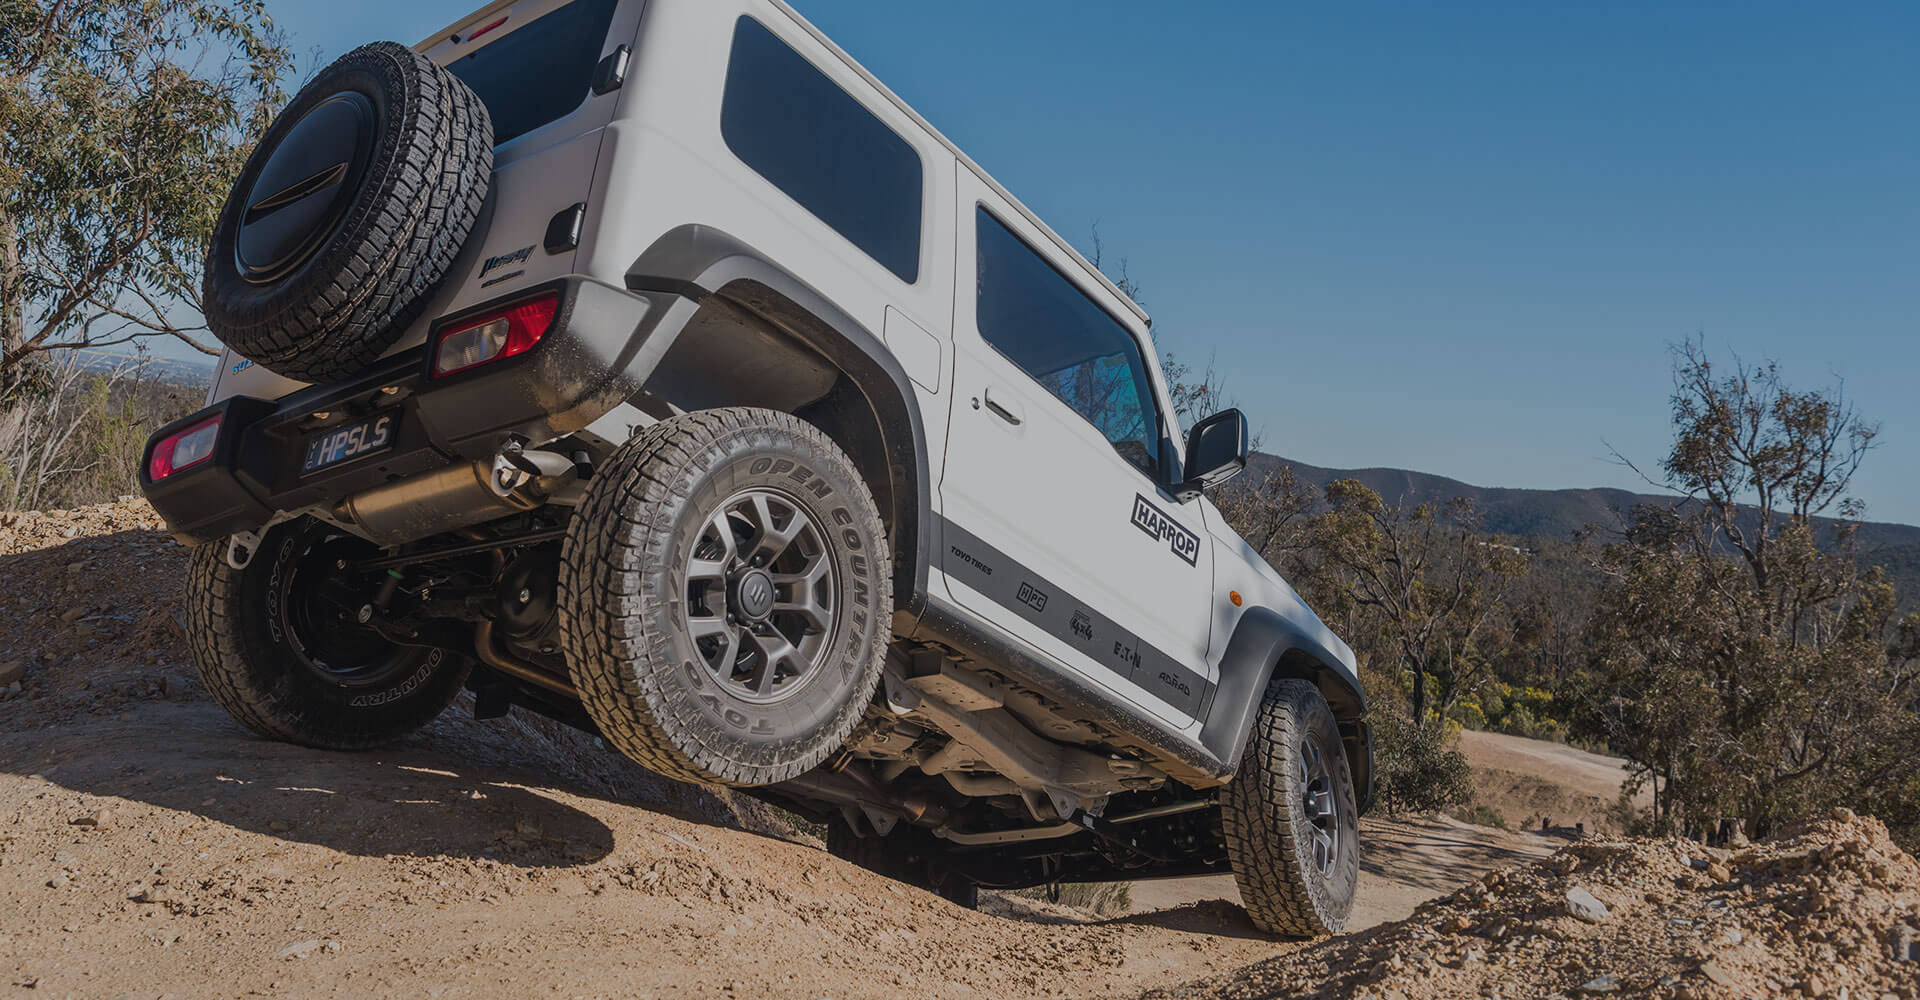 A Suzuki Jimny flexes with the rear wheel off the ground and a set of Toyo Open Country All Terrain tyres on a dusty dirt track.